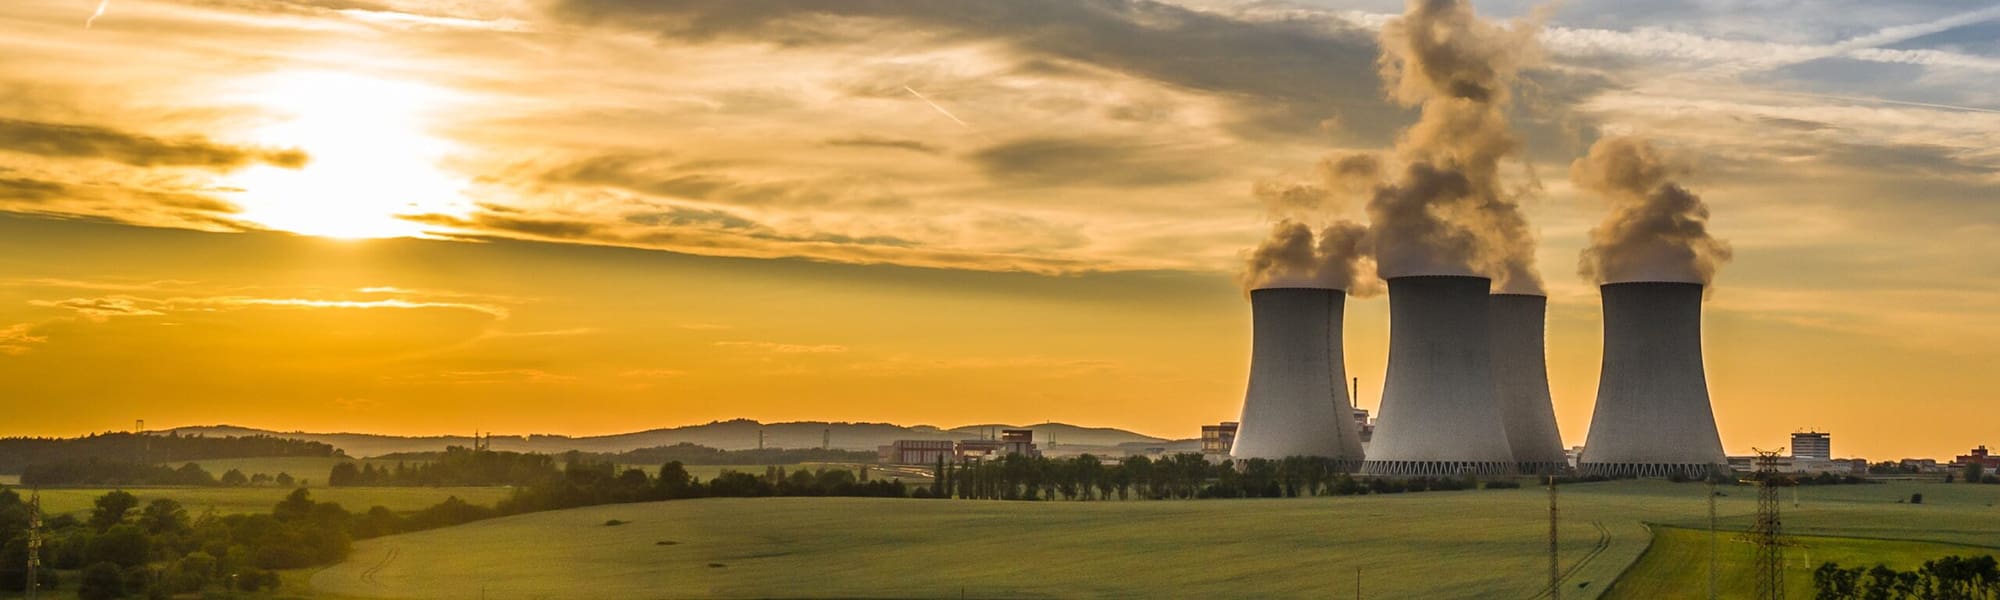 A picture of a nuclear power plant - 4 cooling towers visible and a sunset background